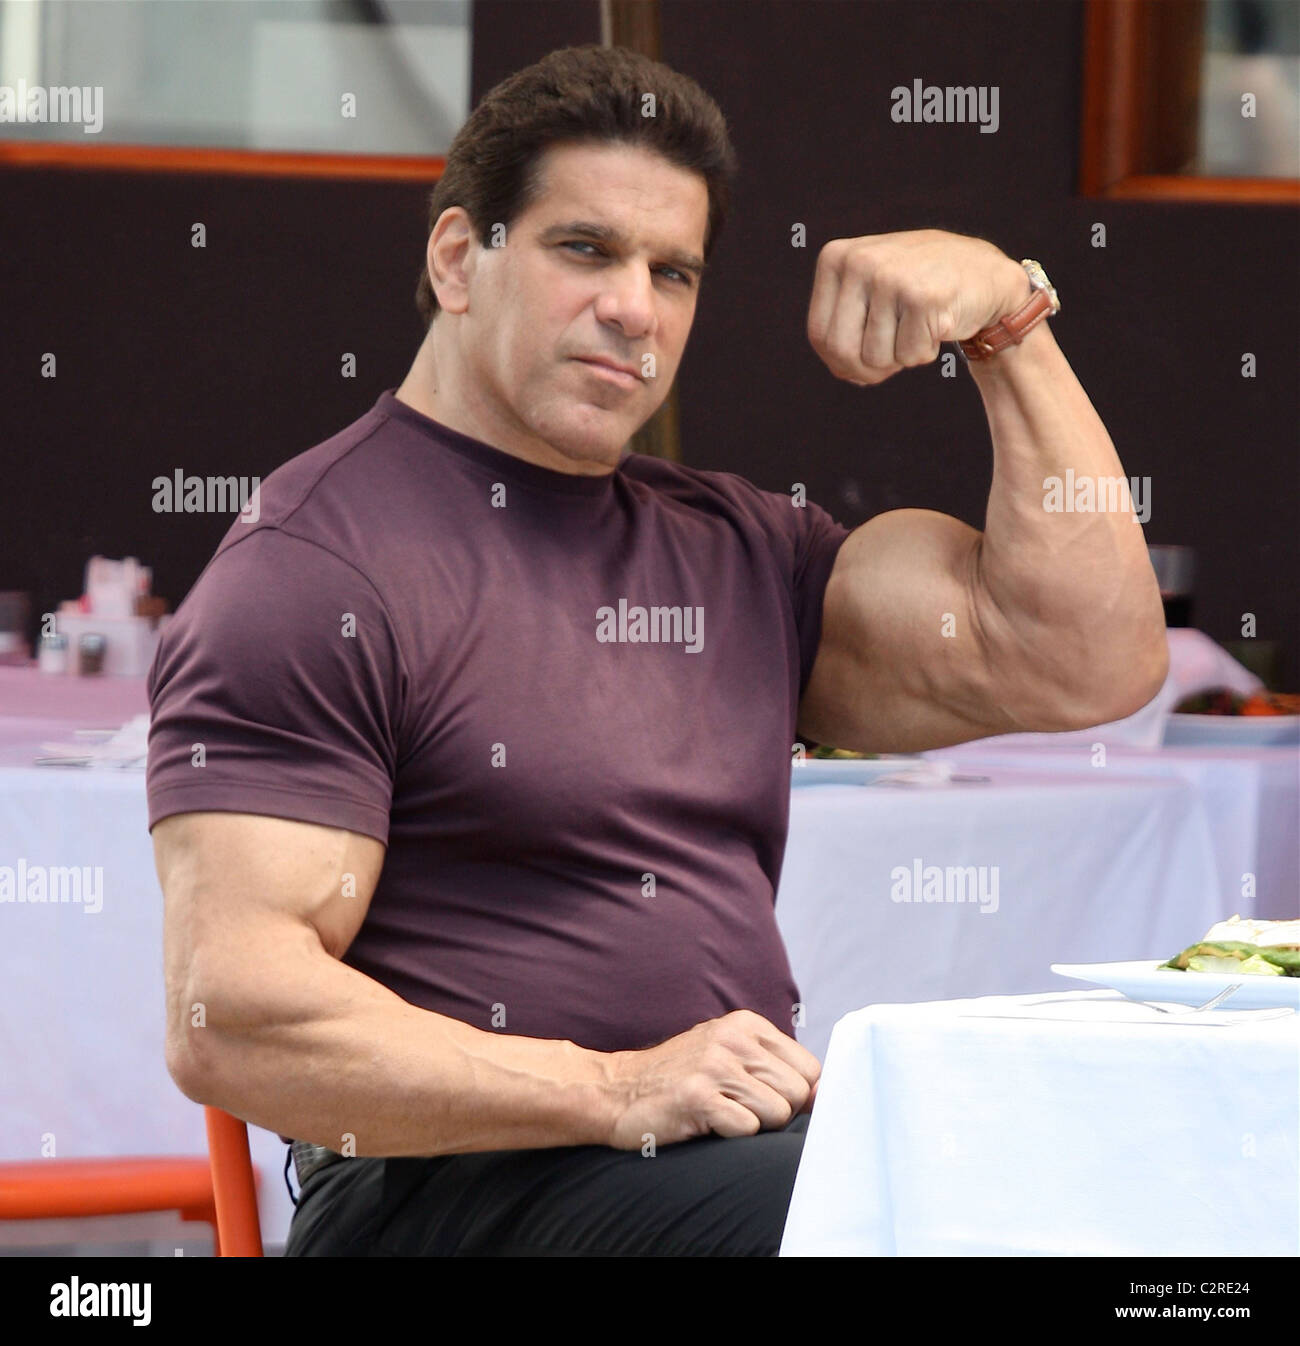 Lou Ferrigno on the set of the new film 'I Love You, Man' Los Angeles